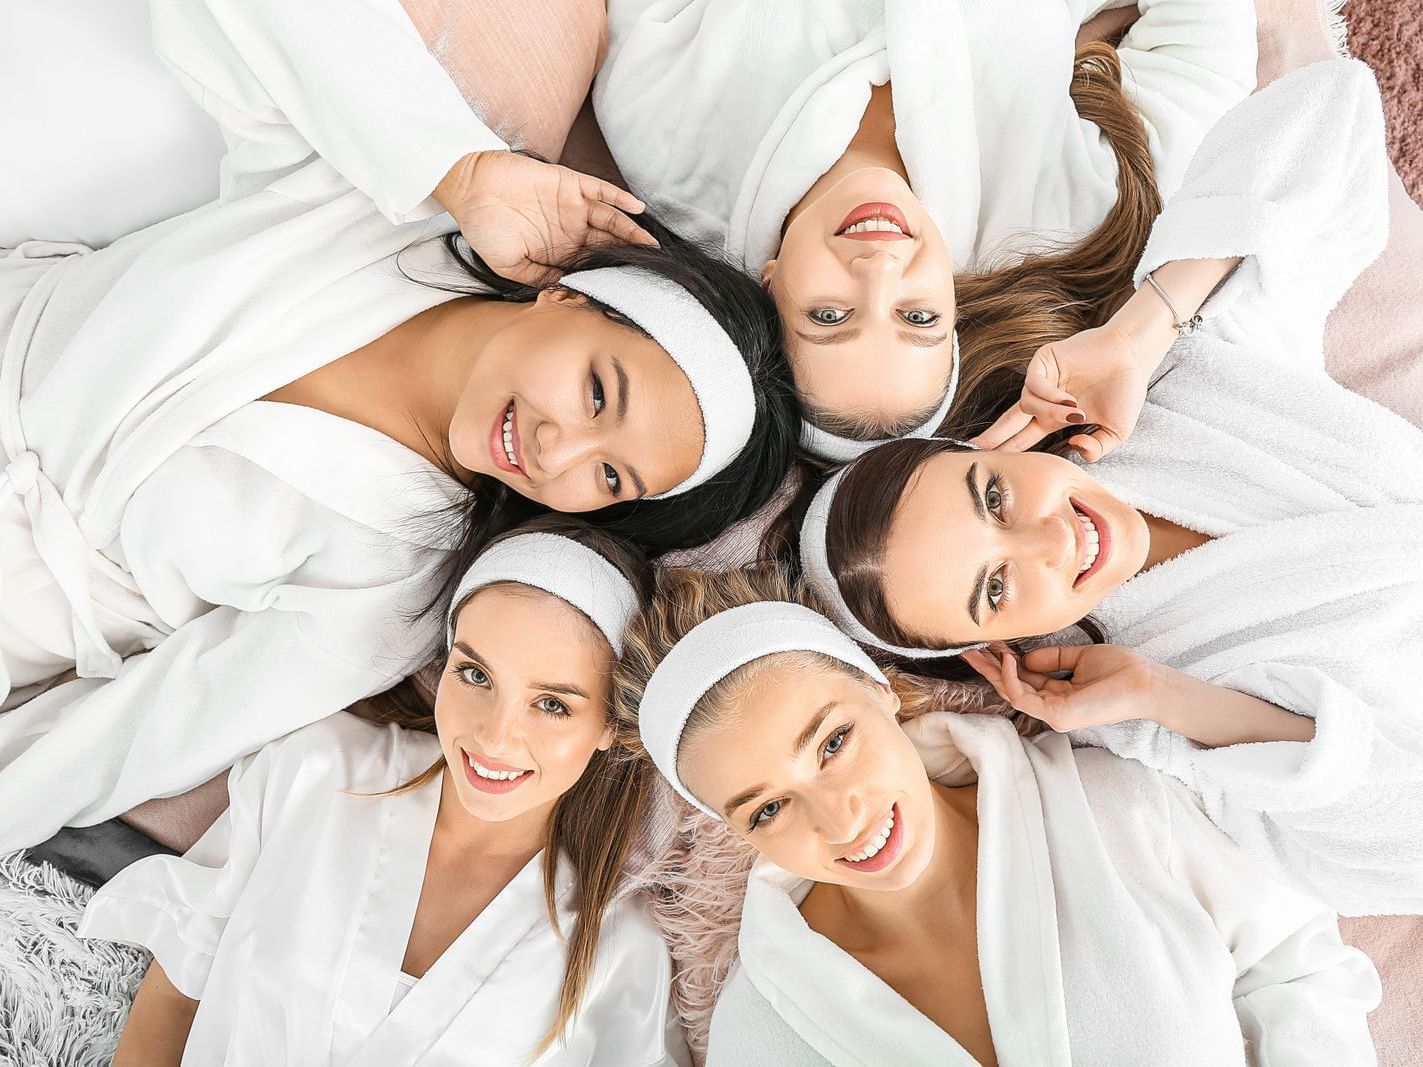 Girls laying in a circle facing the camera, La Colección